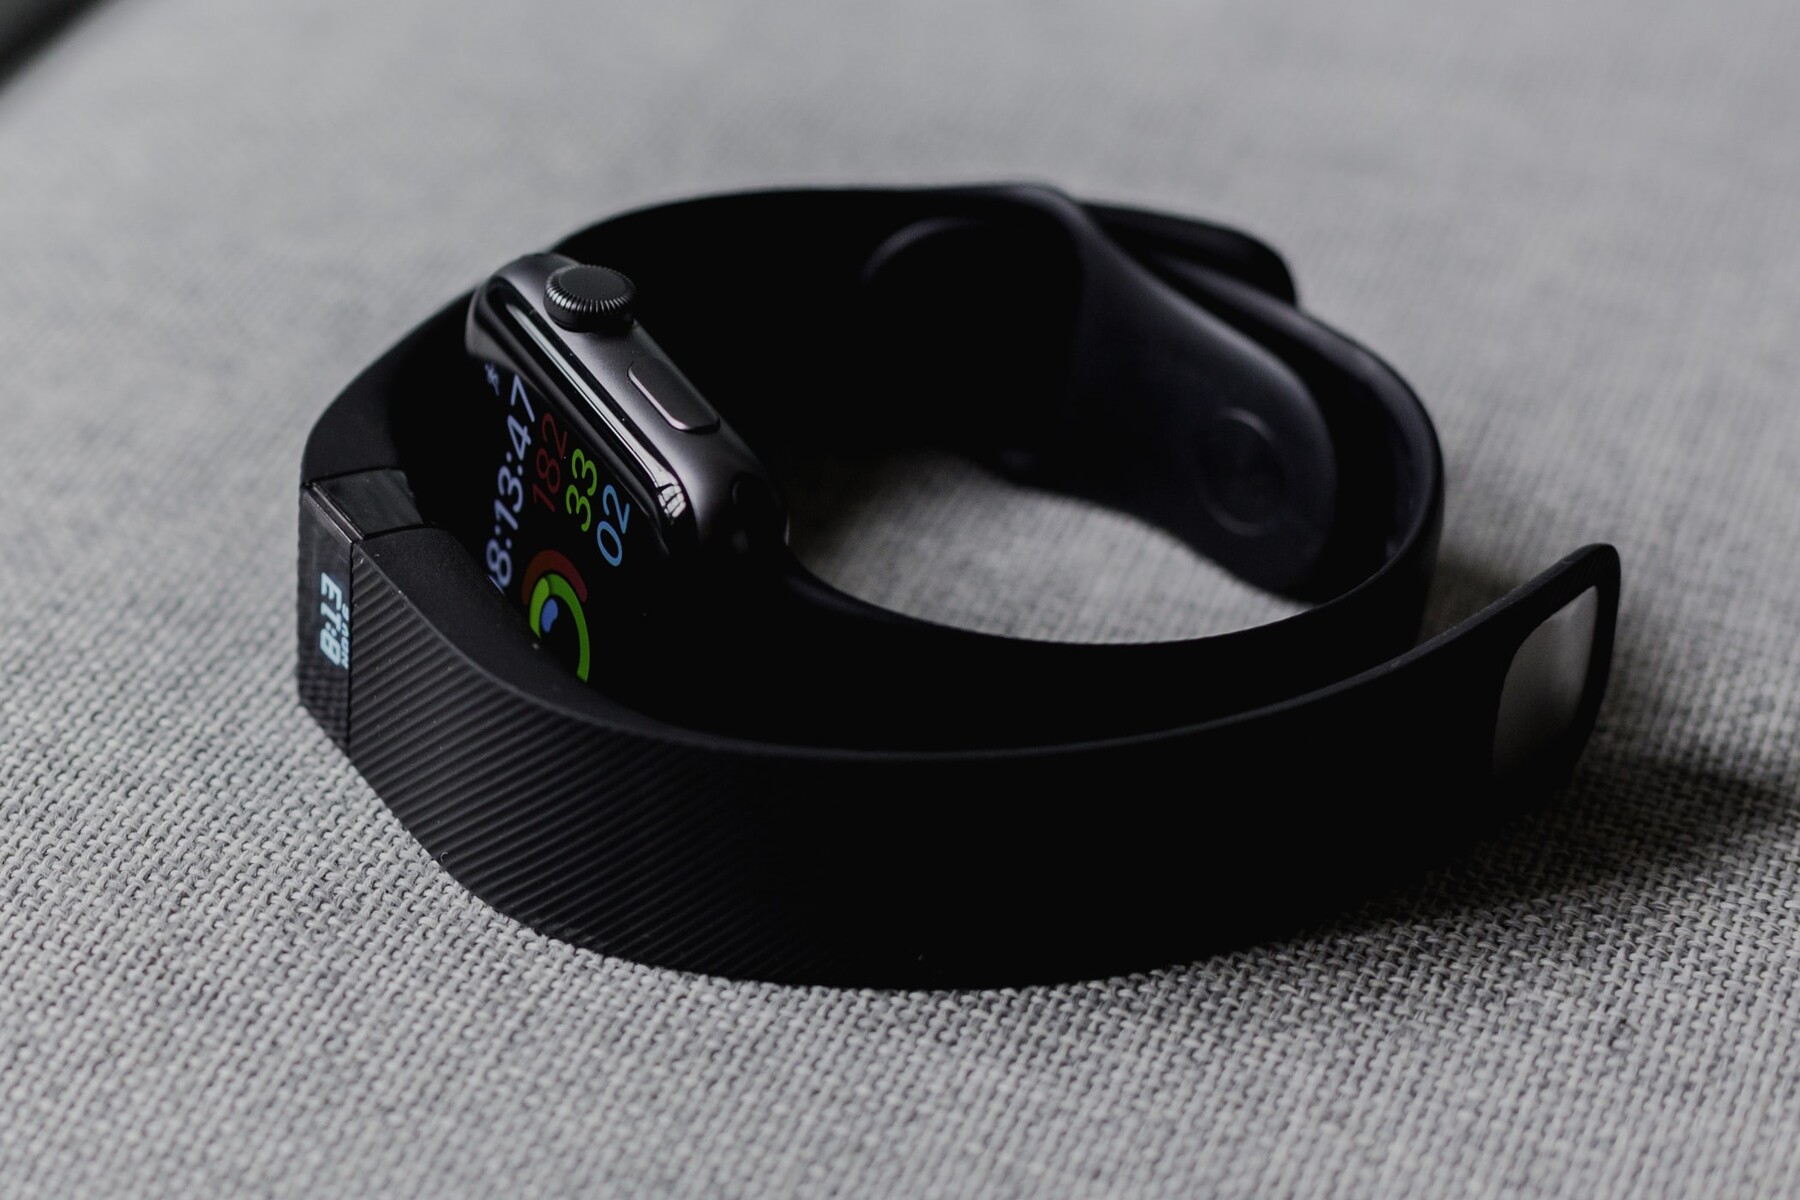 step-precision-determining-your-stride-length-for-fitbit